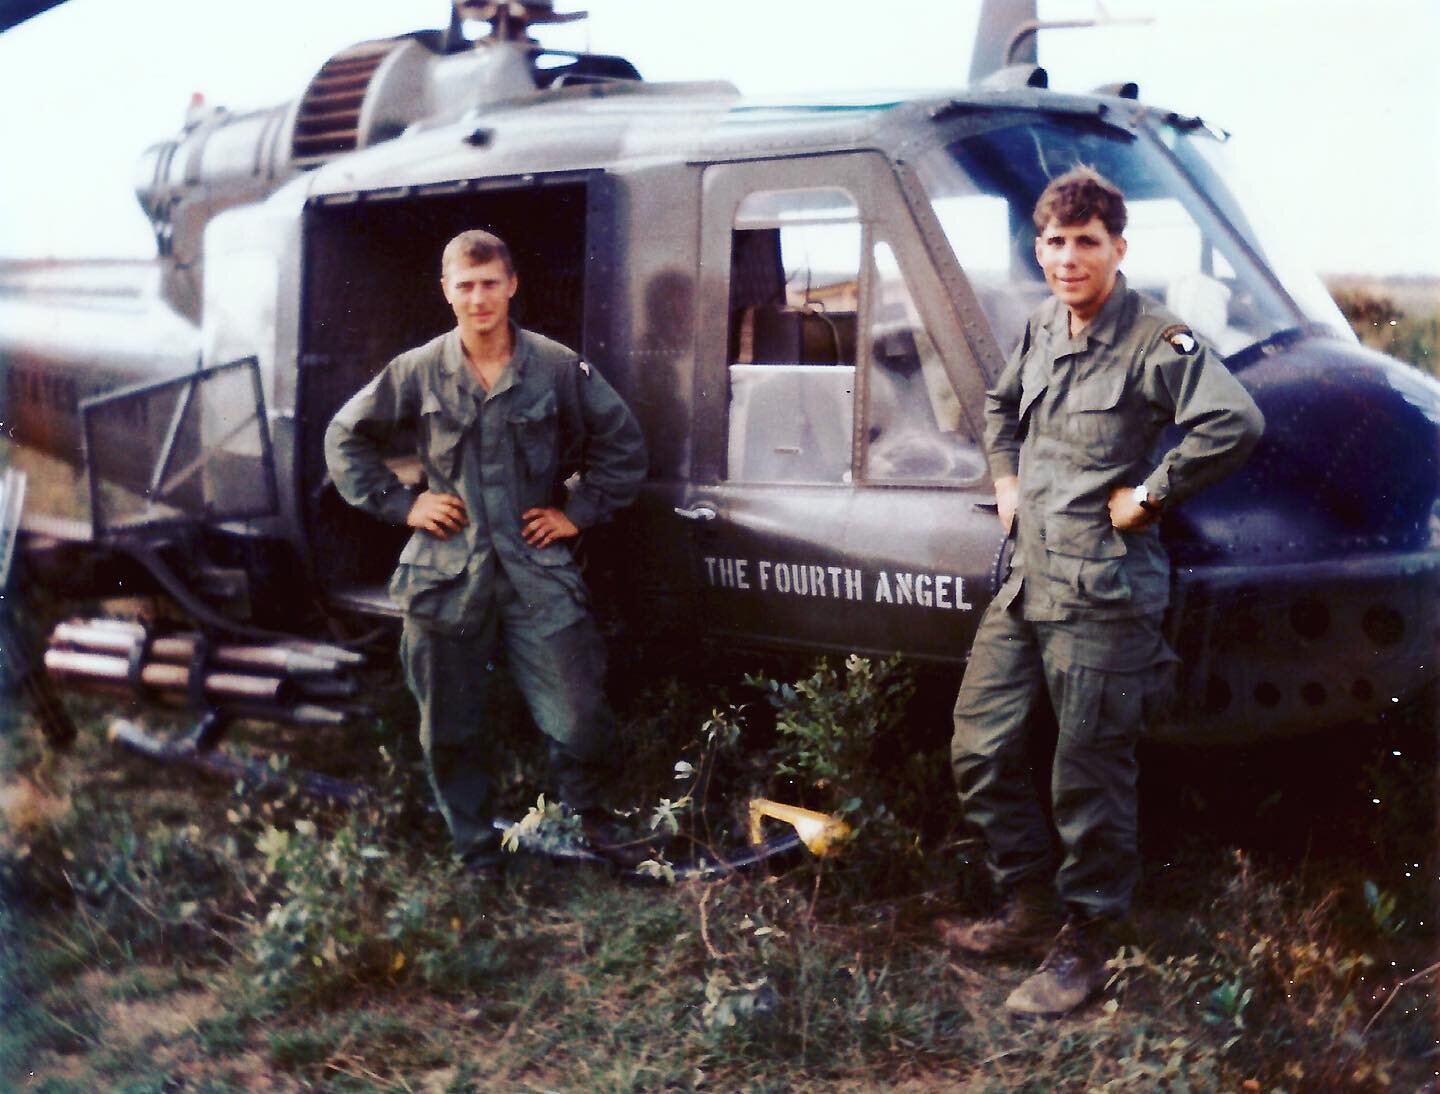 Thank you dad and to all our veterans 🖤 

My dad (on right) and mom got married just before he left for Vietnam; he spent his 21st birthday there. He was drafted and trained as a crew chief on a helicopter crew where he was in charge of making sure 